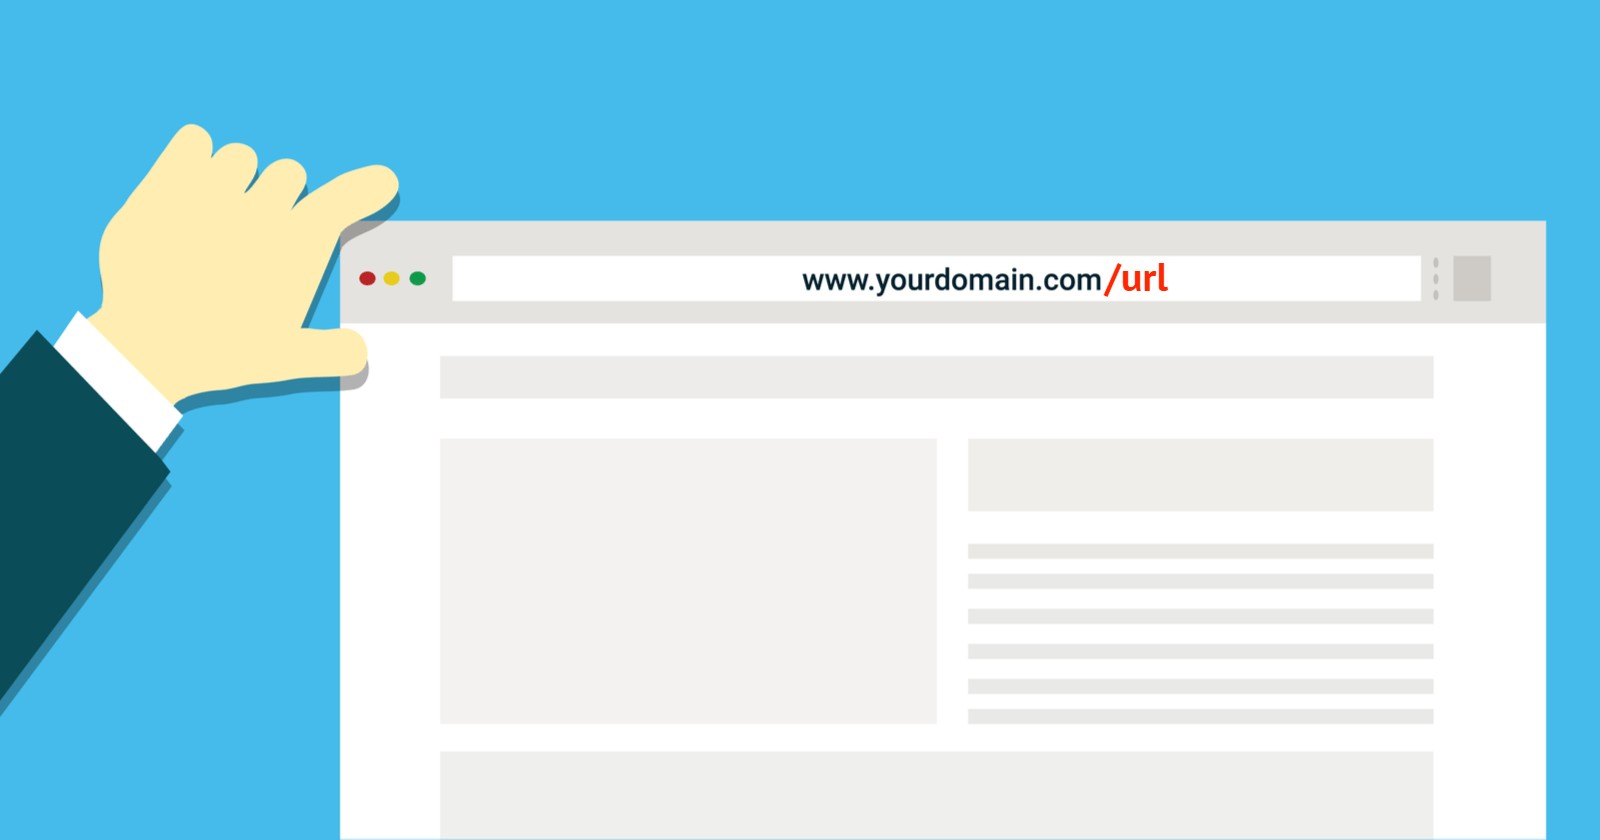 The importance of using descriptive URLs for SEO